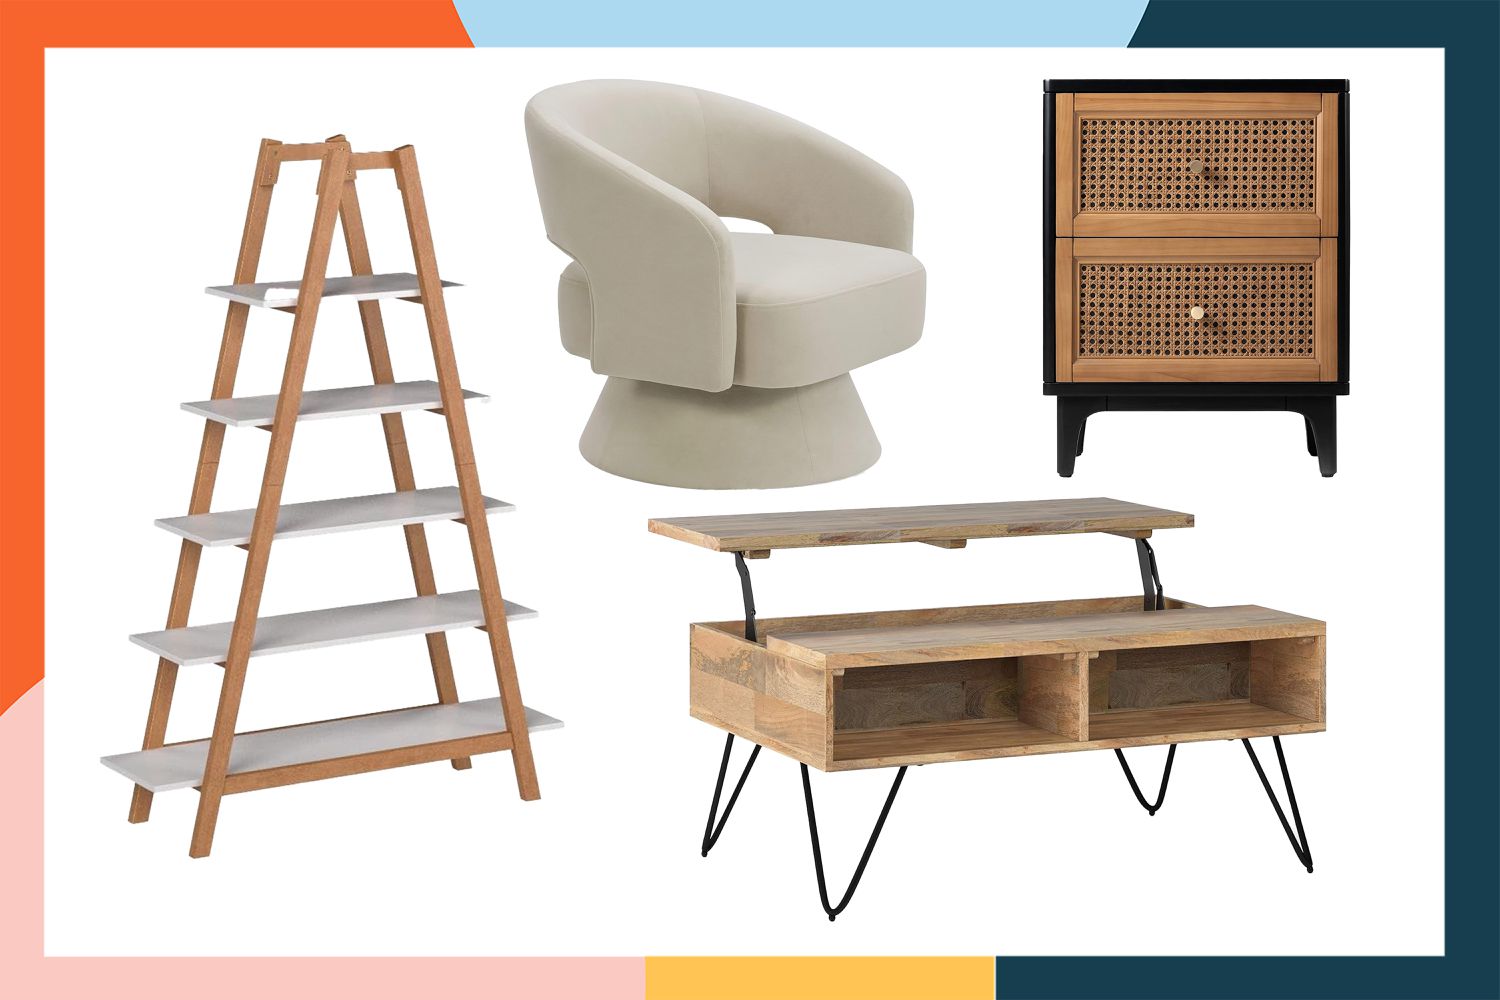 Amazons New Hidden Home Store Is Full of Elevated Furniture Deals [Video]